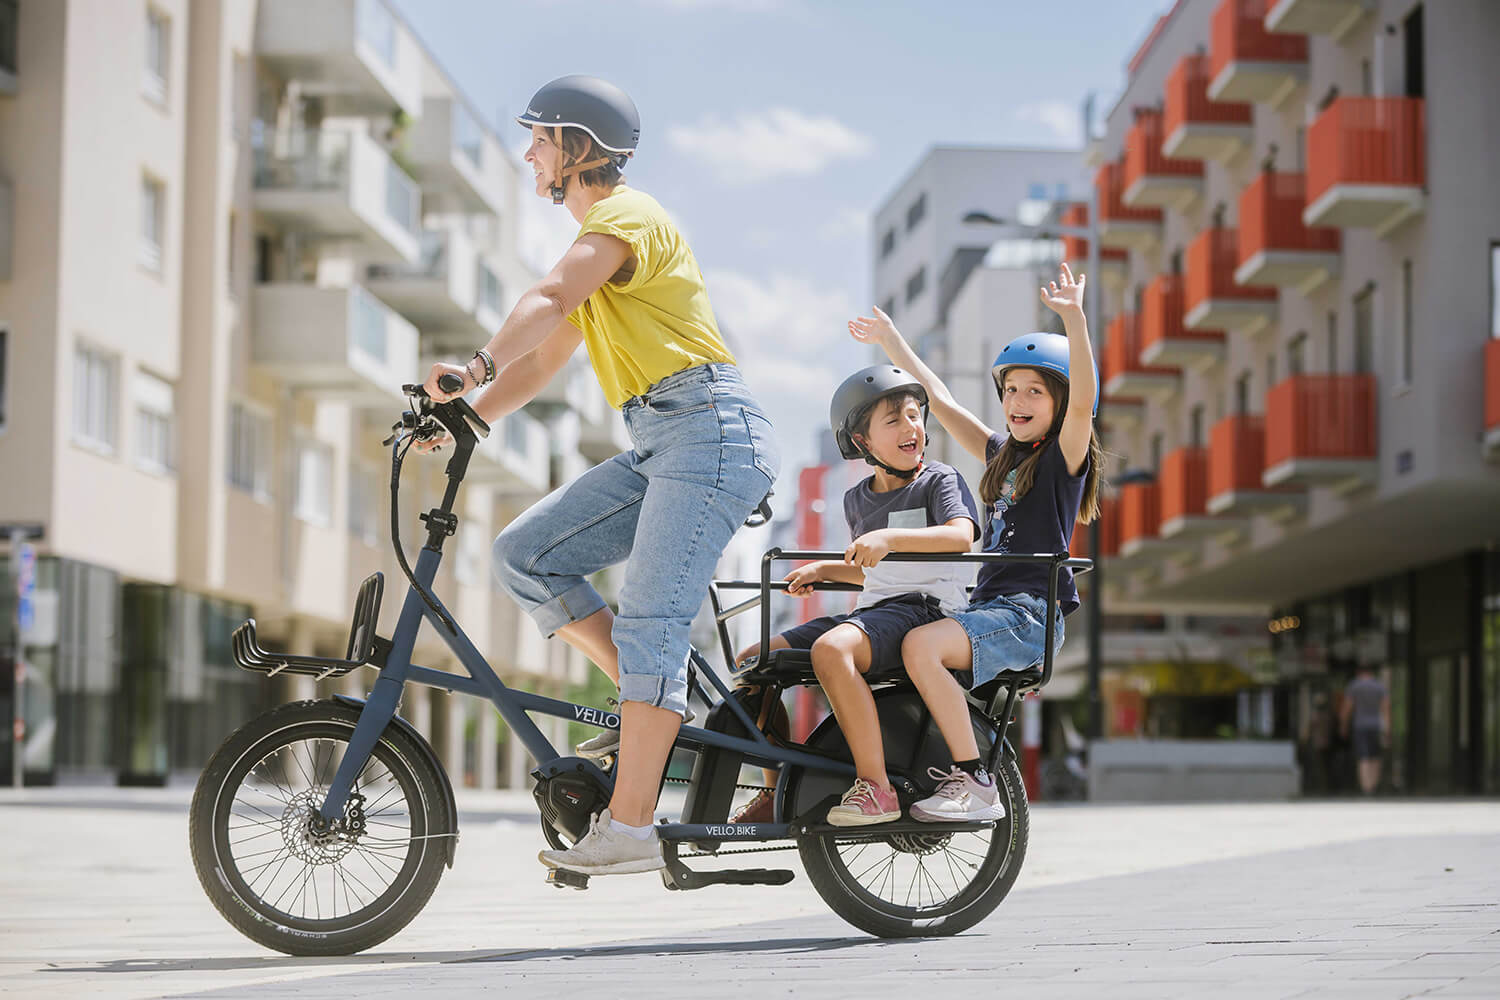 The VELLO SUB, one of the lightest cargo e-bikes ever built. Transport children, groceries, or animal companions in the VELLO SUB’s additional space for two passengers. 